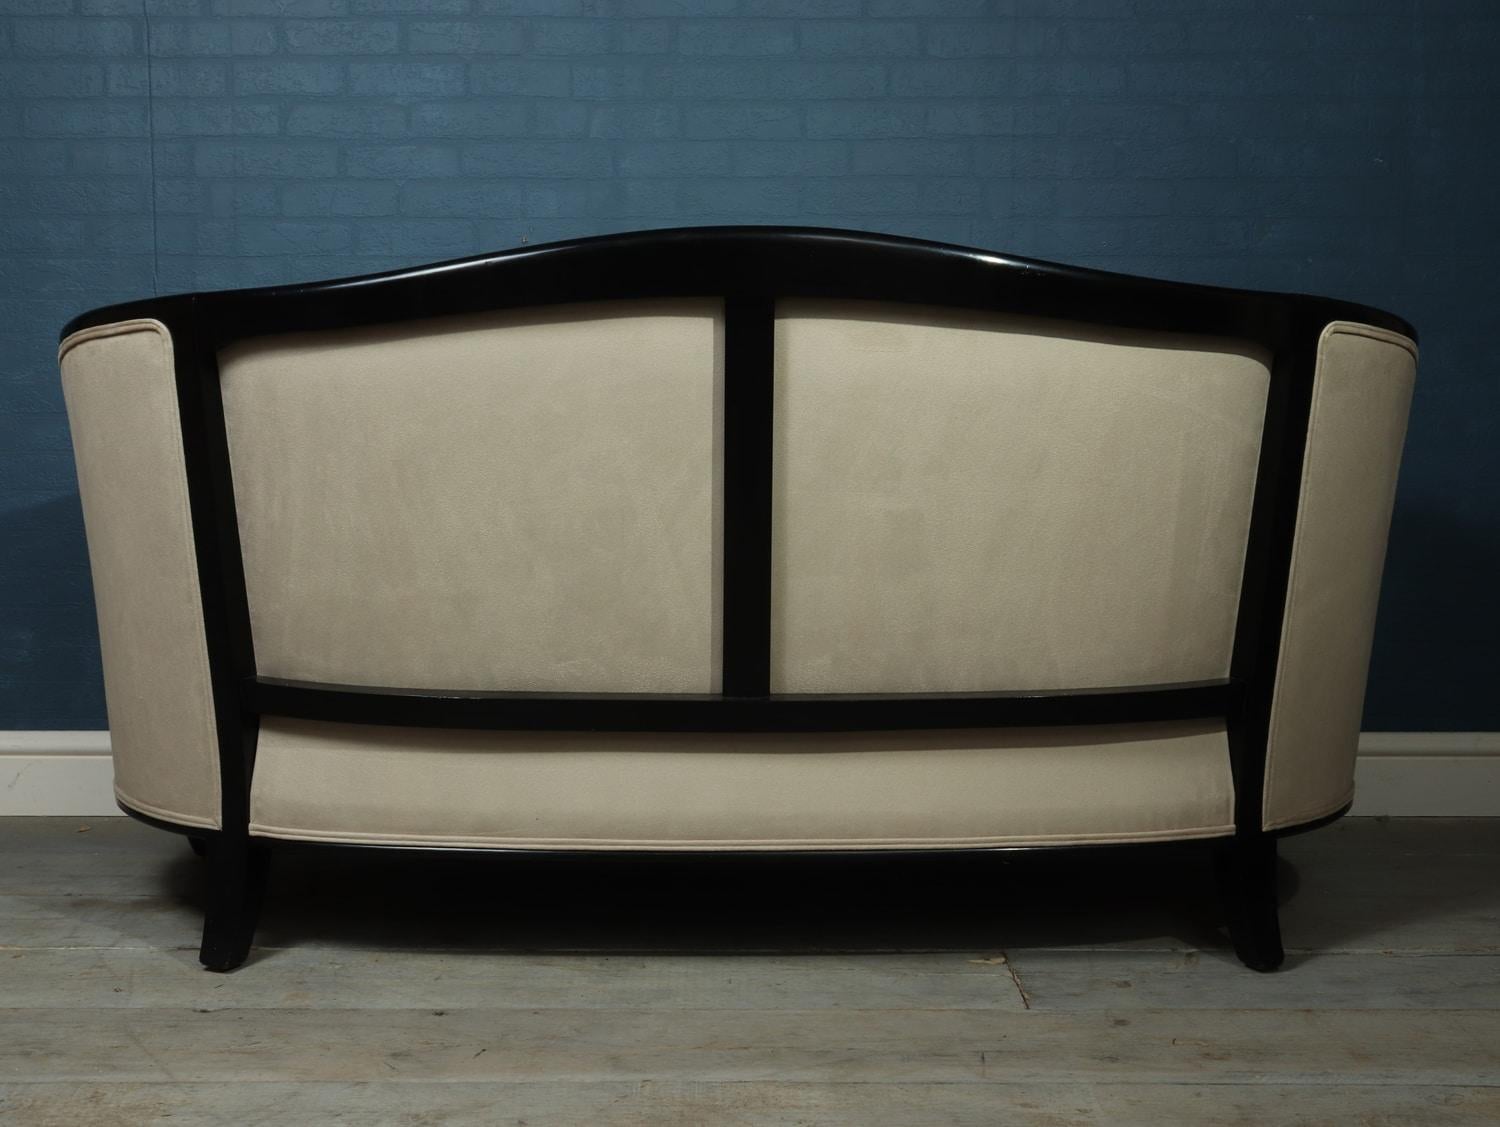 French Art Deco Chairs and Sofa by Paul Follot, circa 1920 For Sale 4